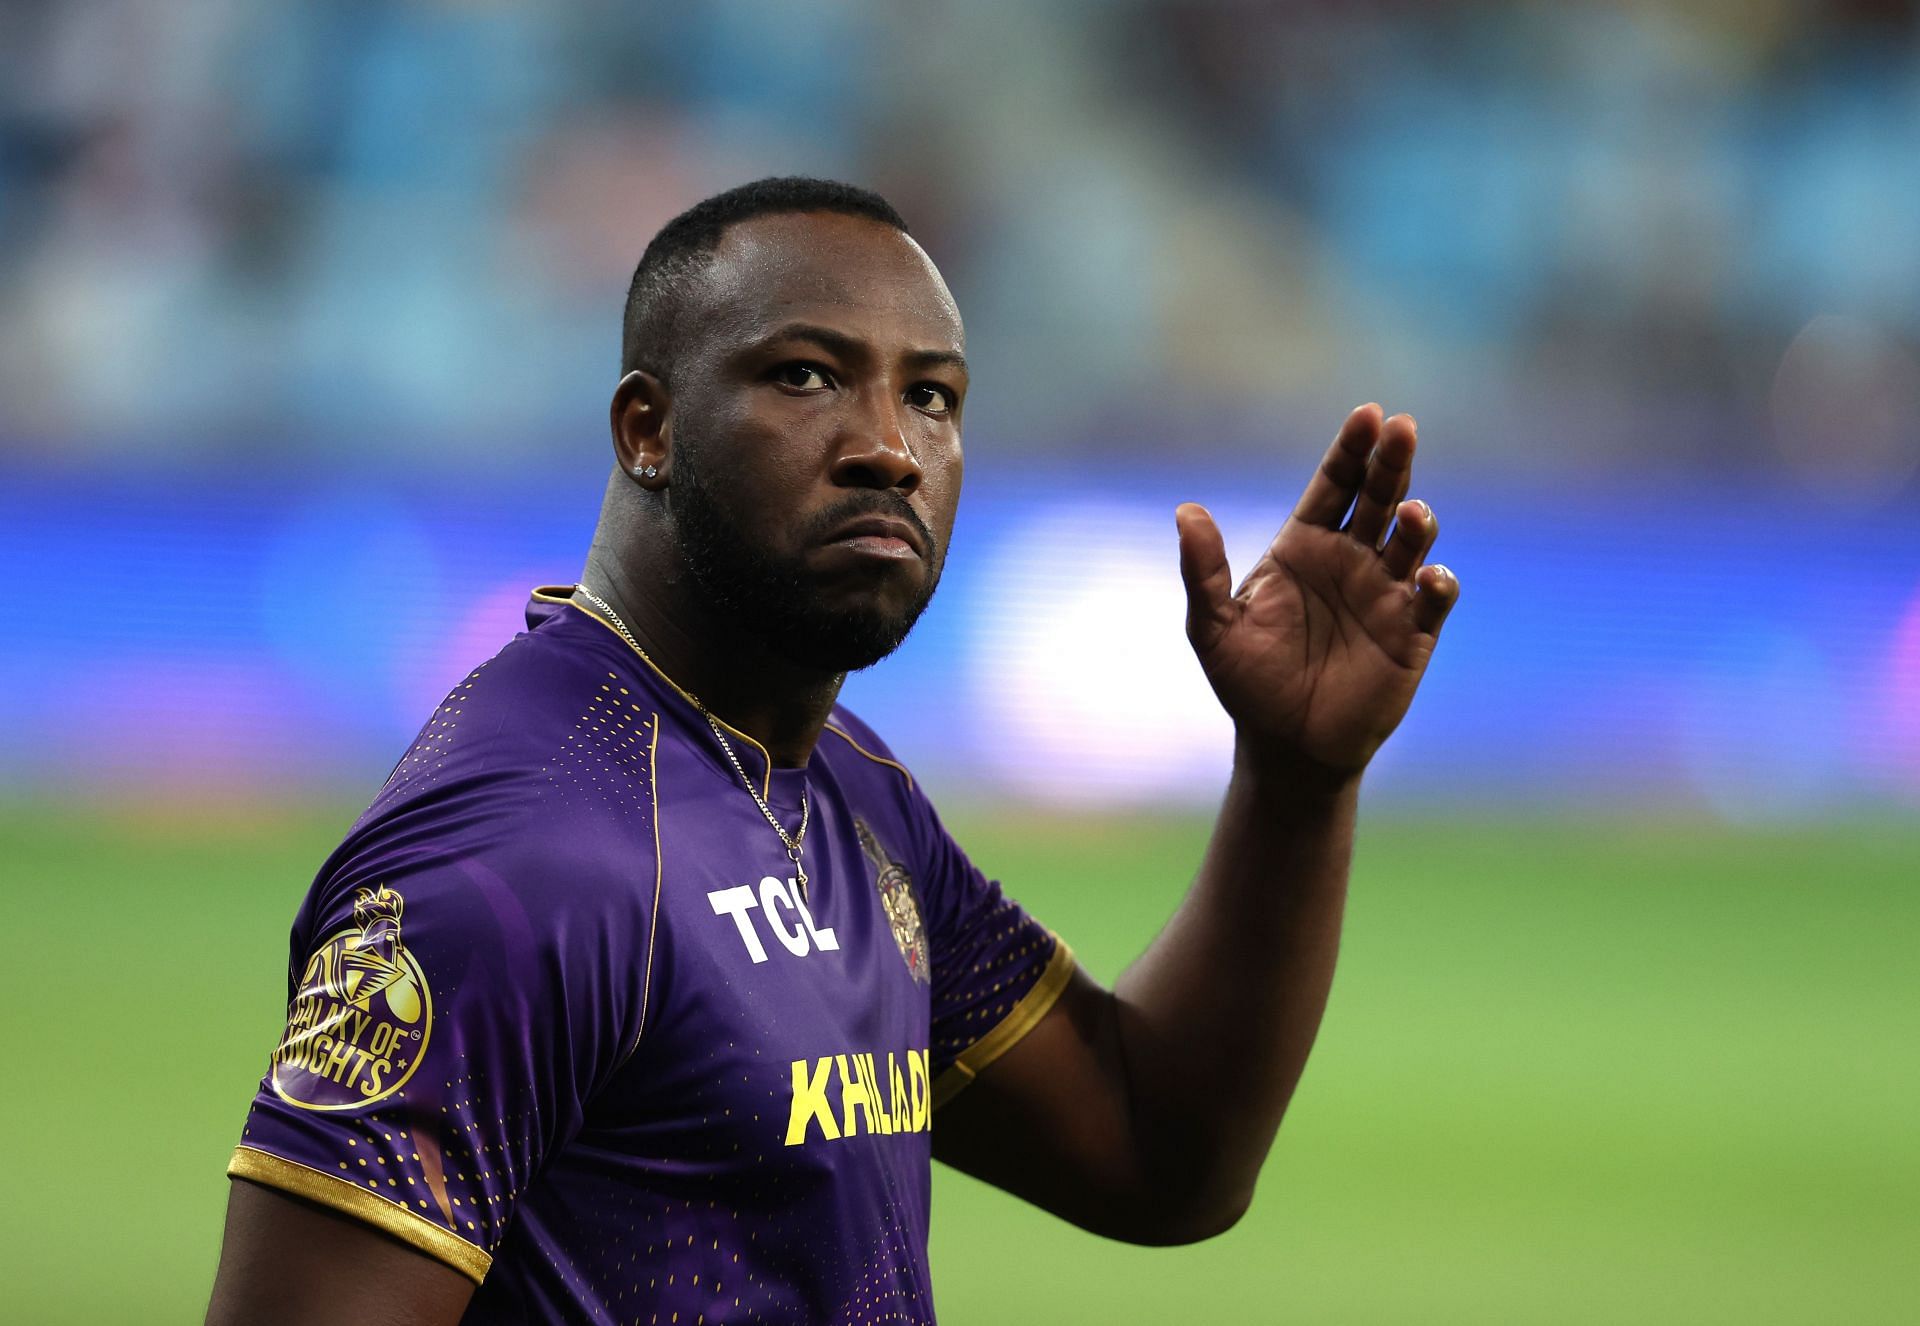 Andre Russell has been the MVP in IPL 2015 and 2019